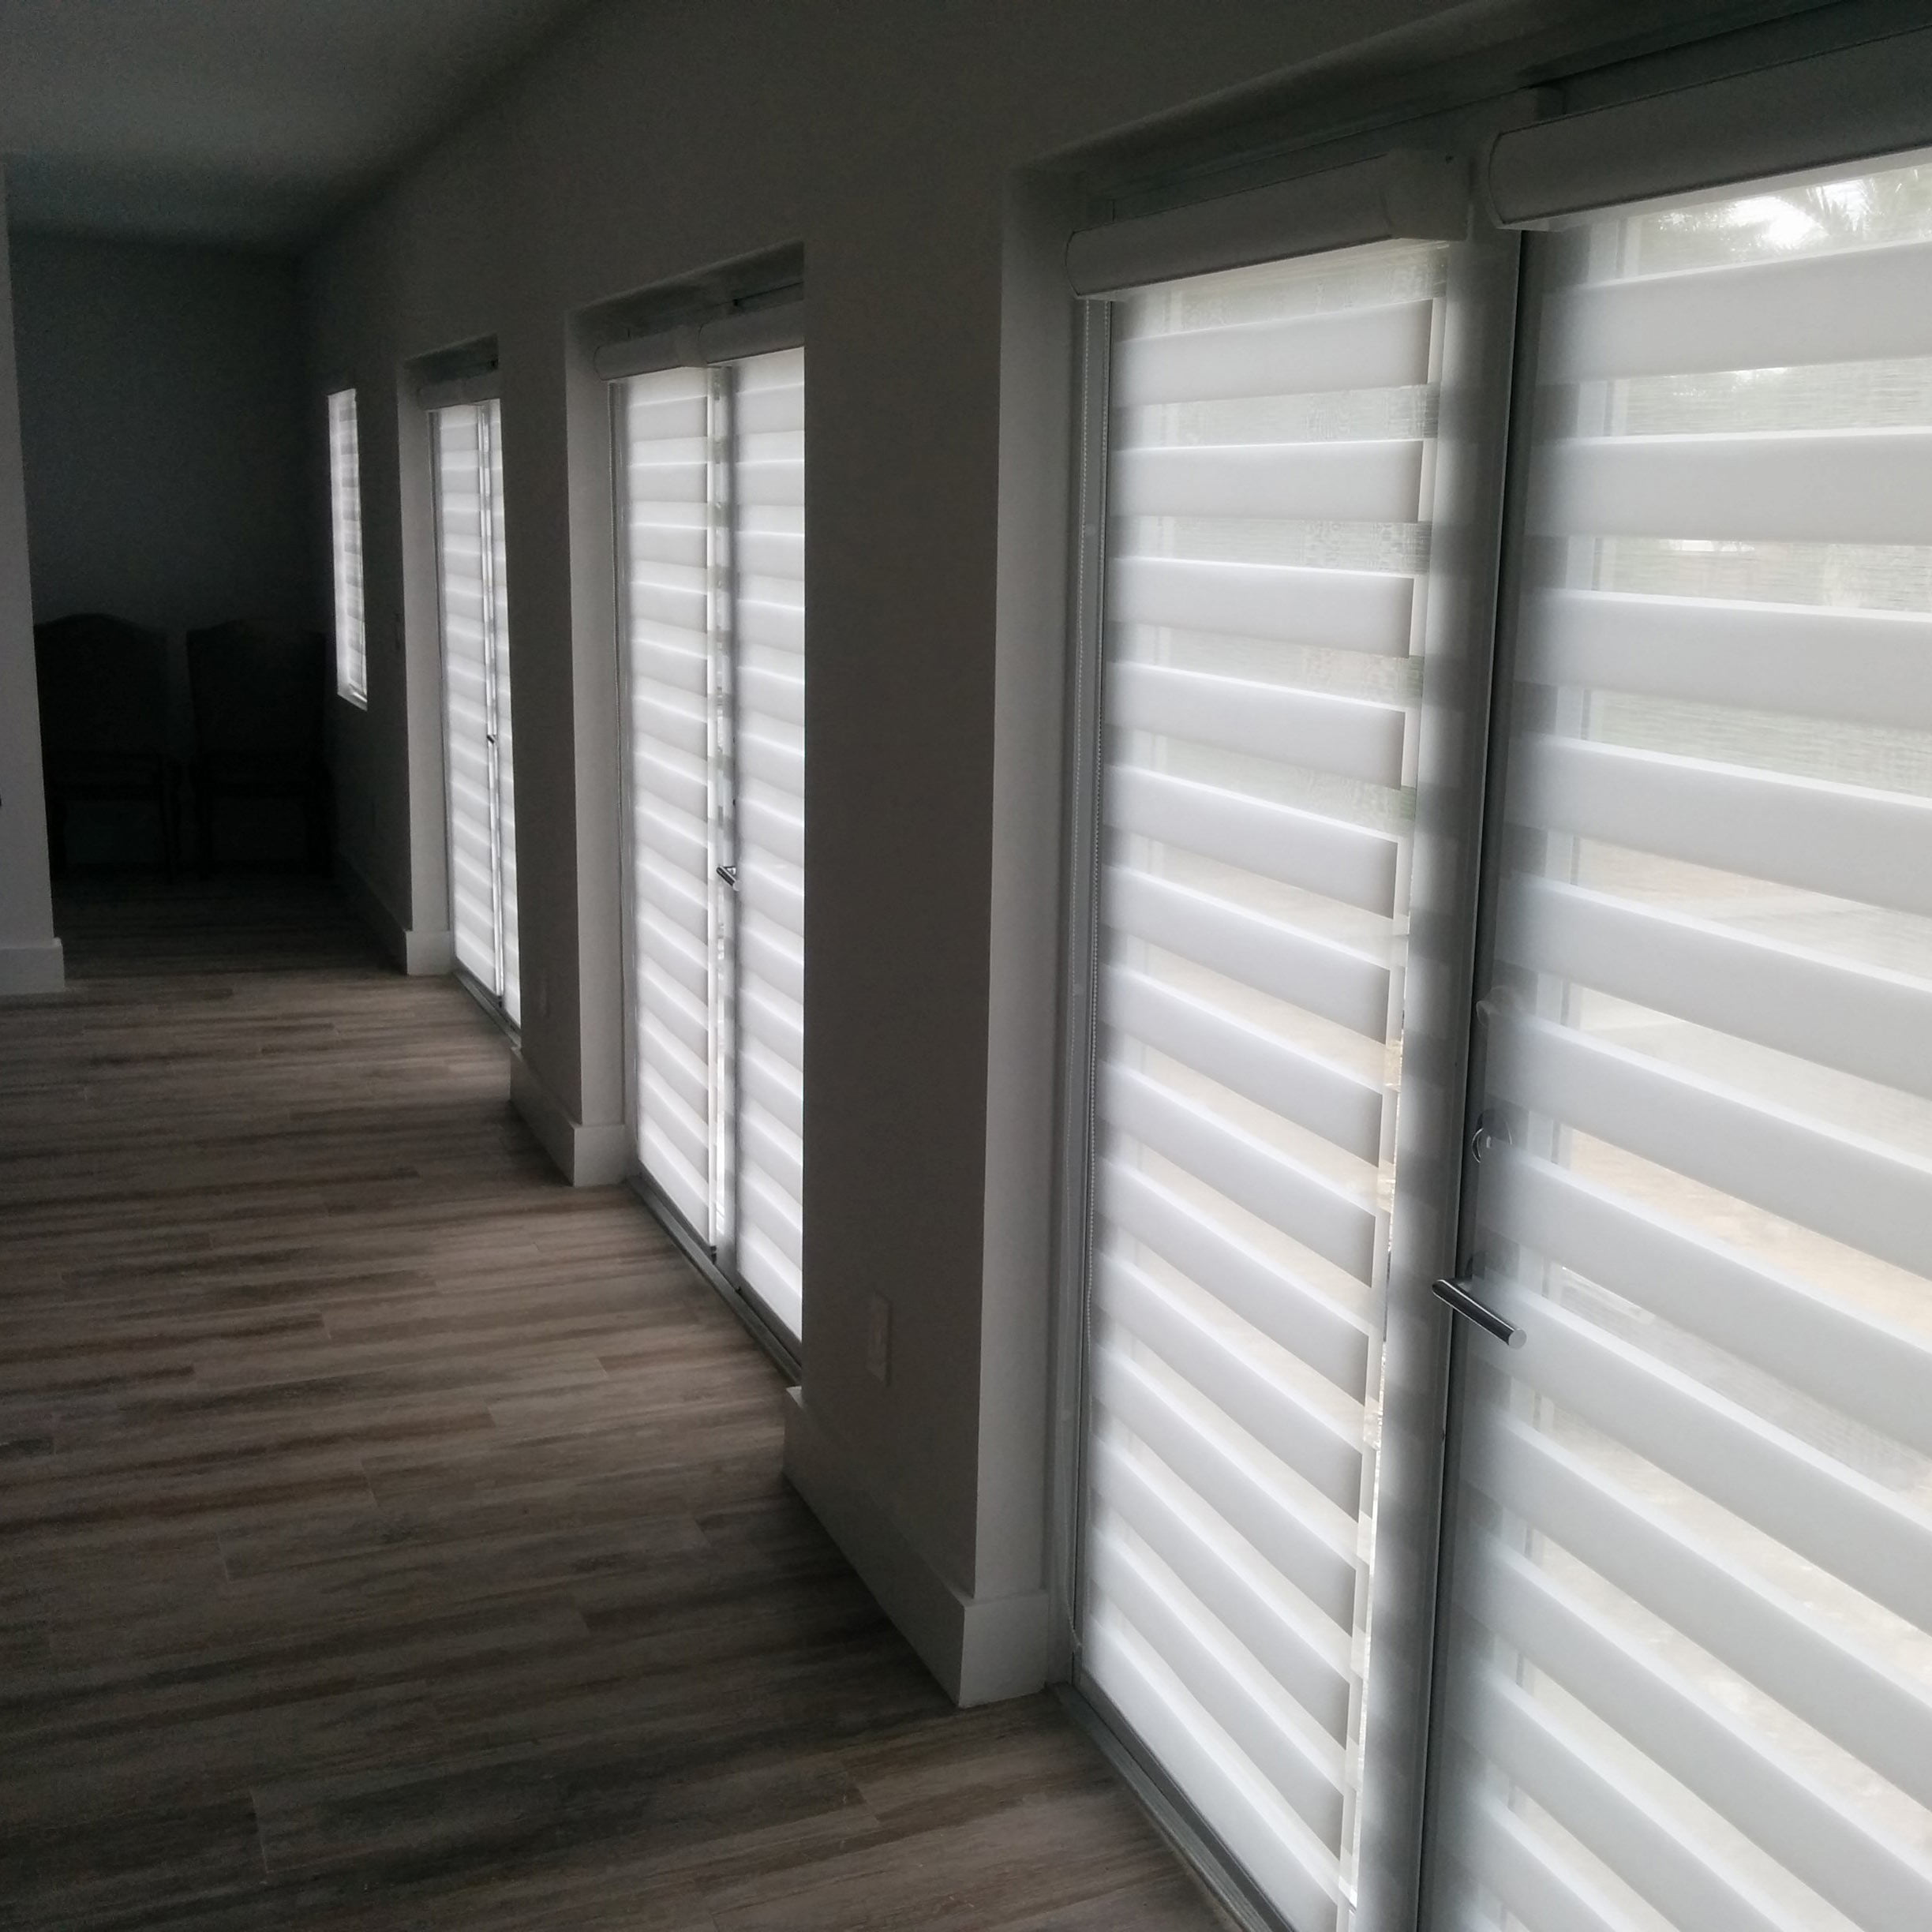 21"x72" Cordless Window Roller Shades Free-Stop Dual Layer Zebra Blinds 